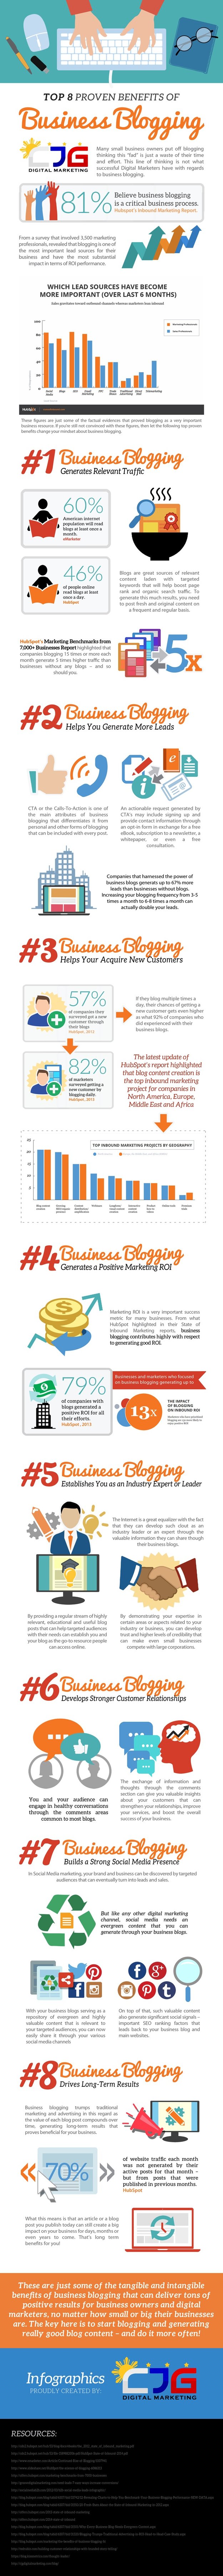 8-reasons-your-company-needs-a-business-blog-infographic